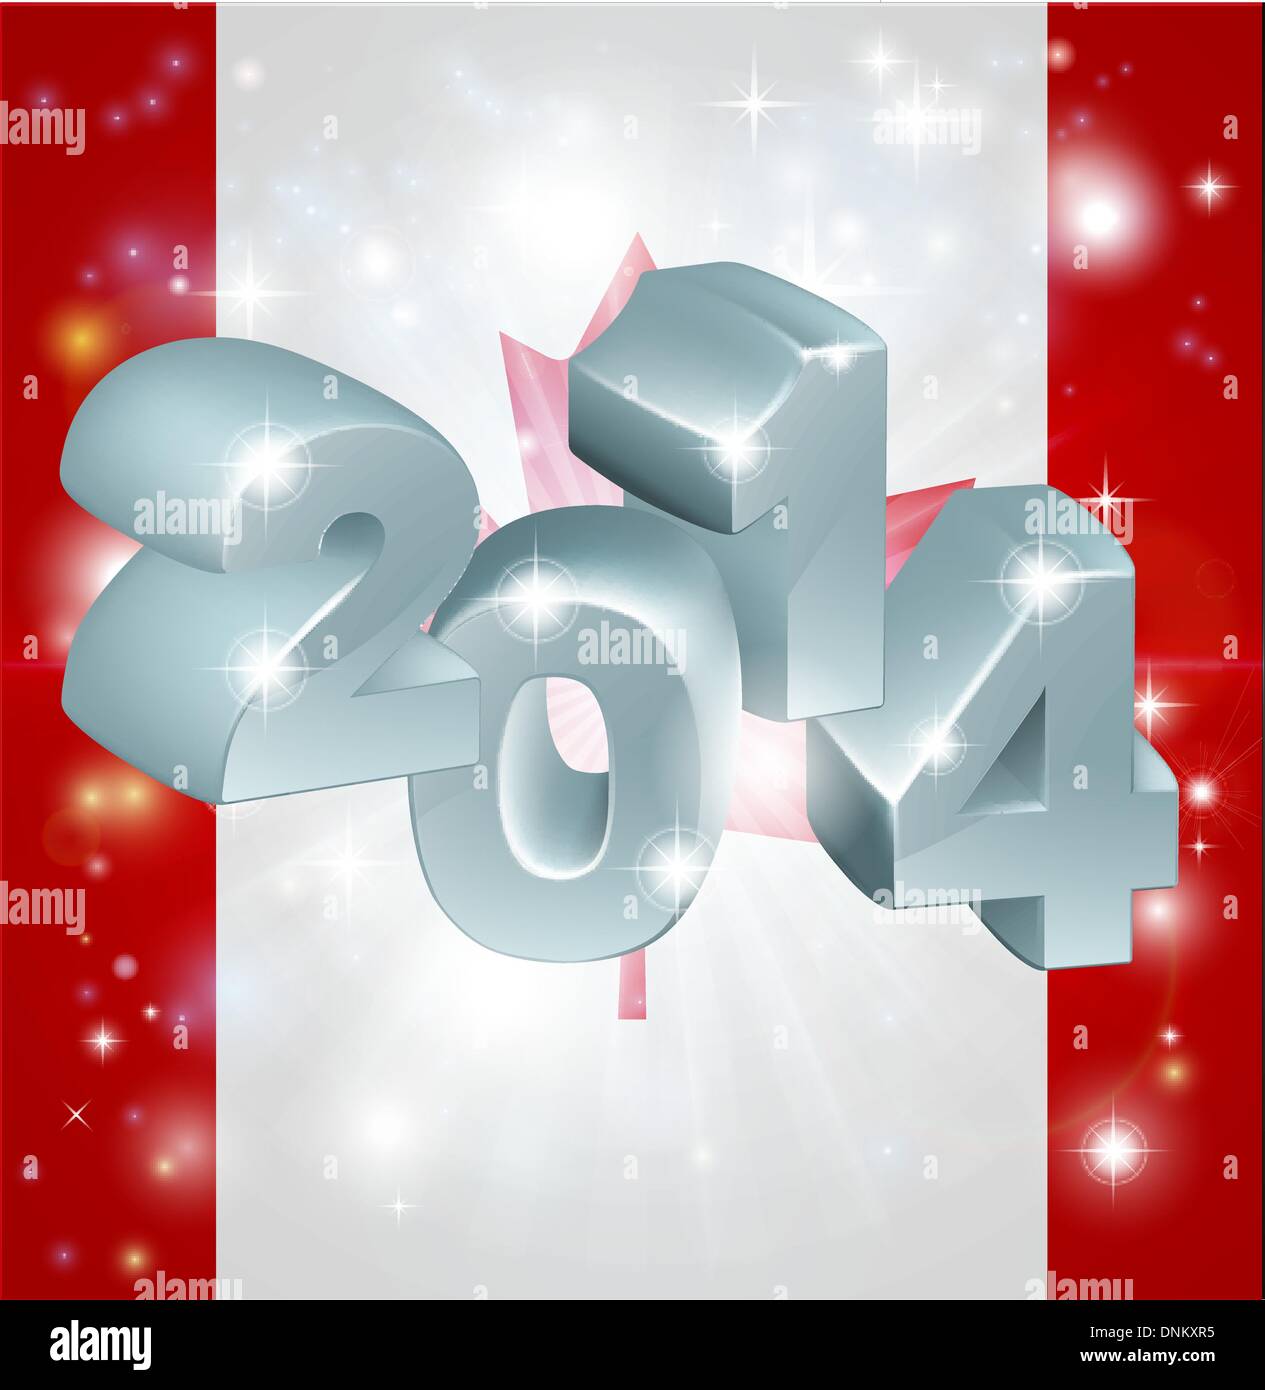 Flag of Canada 2014 background. New Year or similar concept Stock Vector